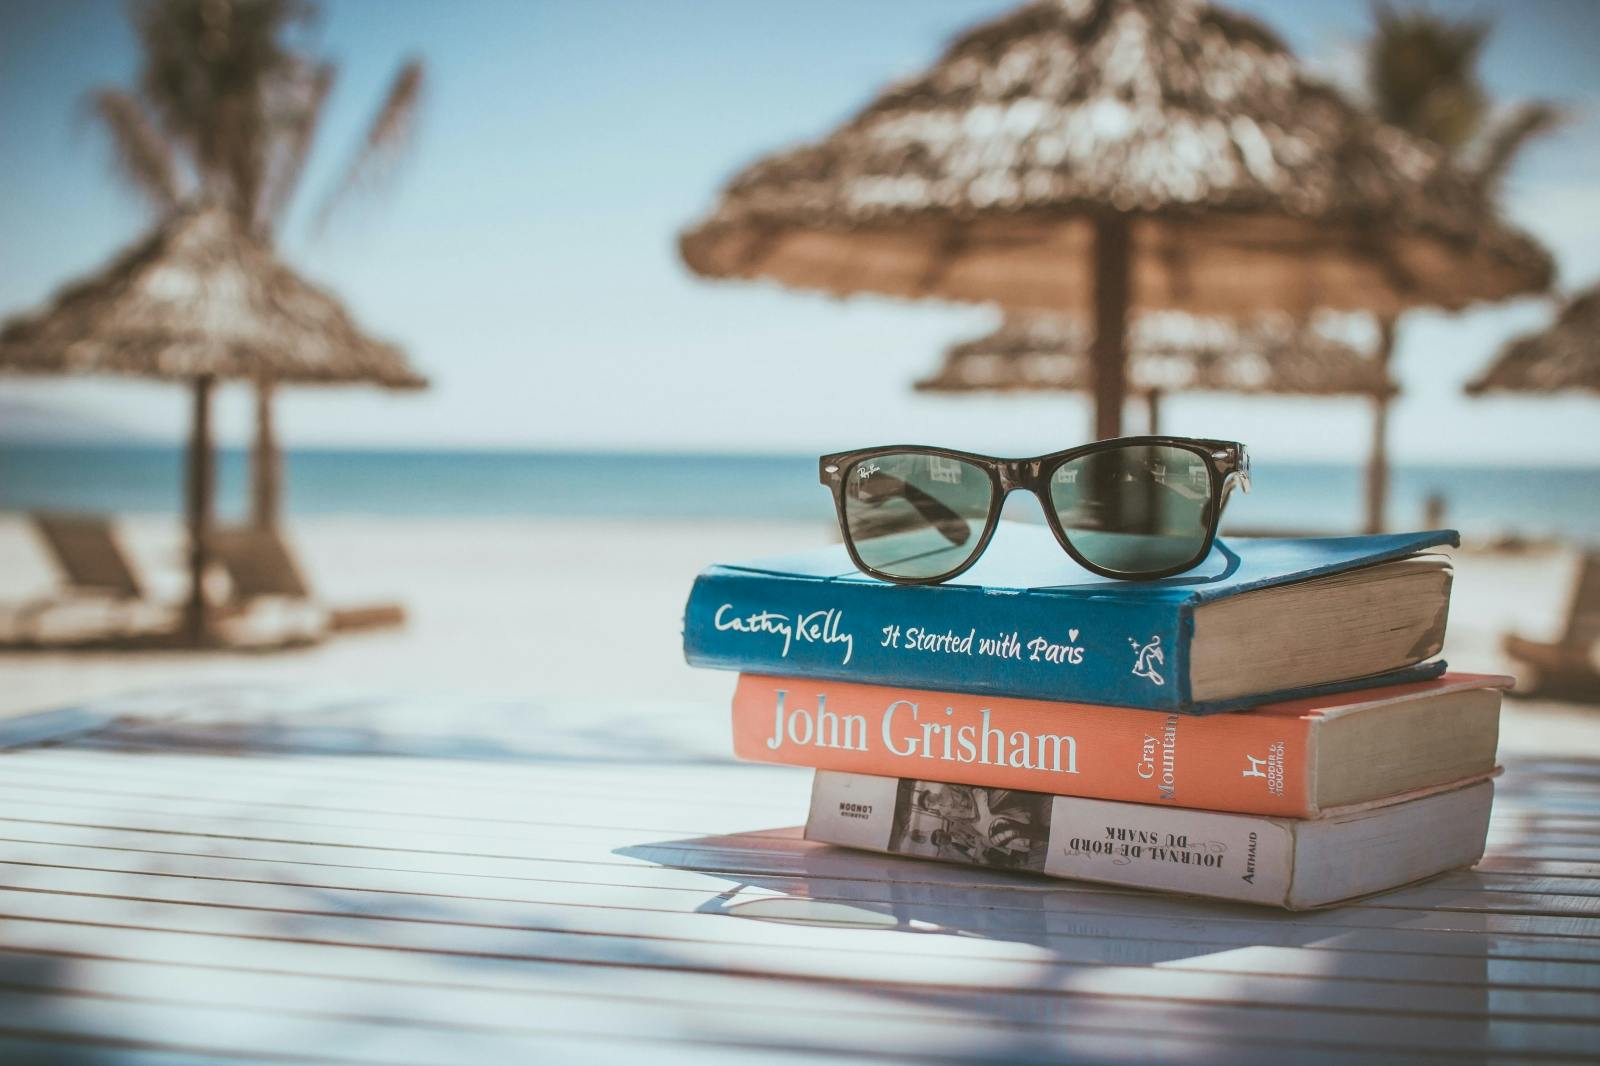 Books on a beach with sunglasses